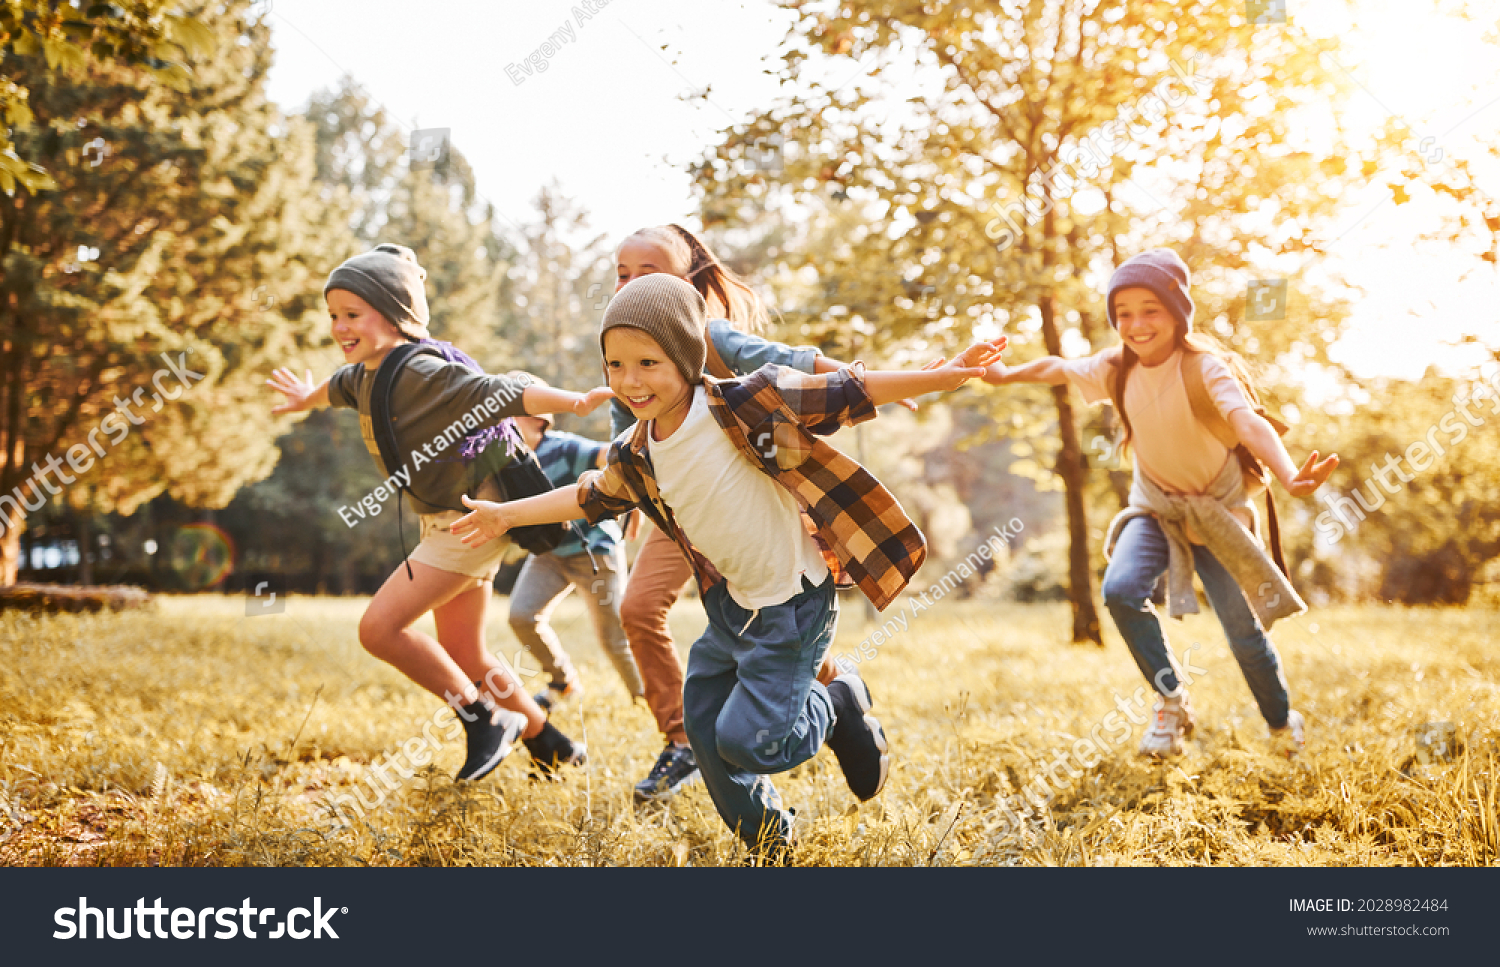 Group of happy joyful school kids with backpacks running with outstretched arms in forest on sunny spring day, excited children scouts boys and girls having fun during camping activity in nature #2028982484